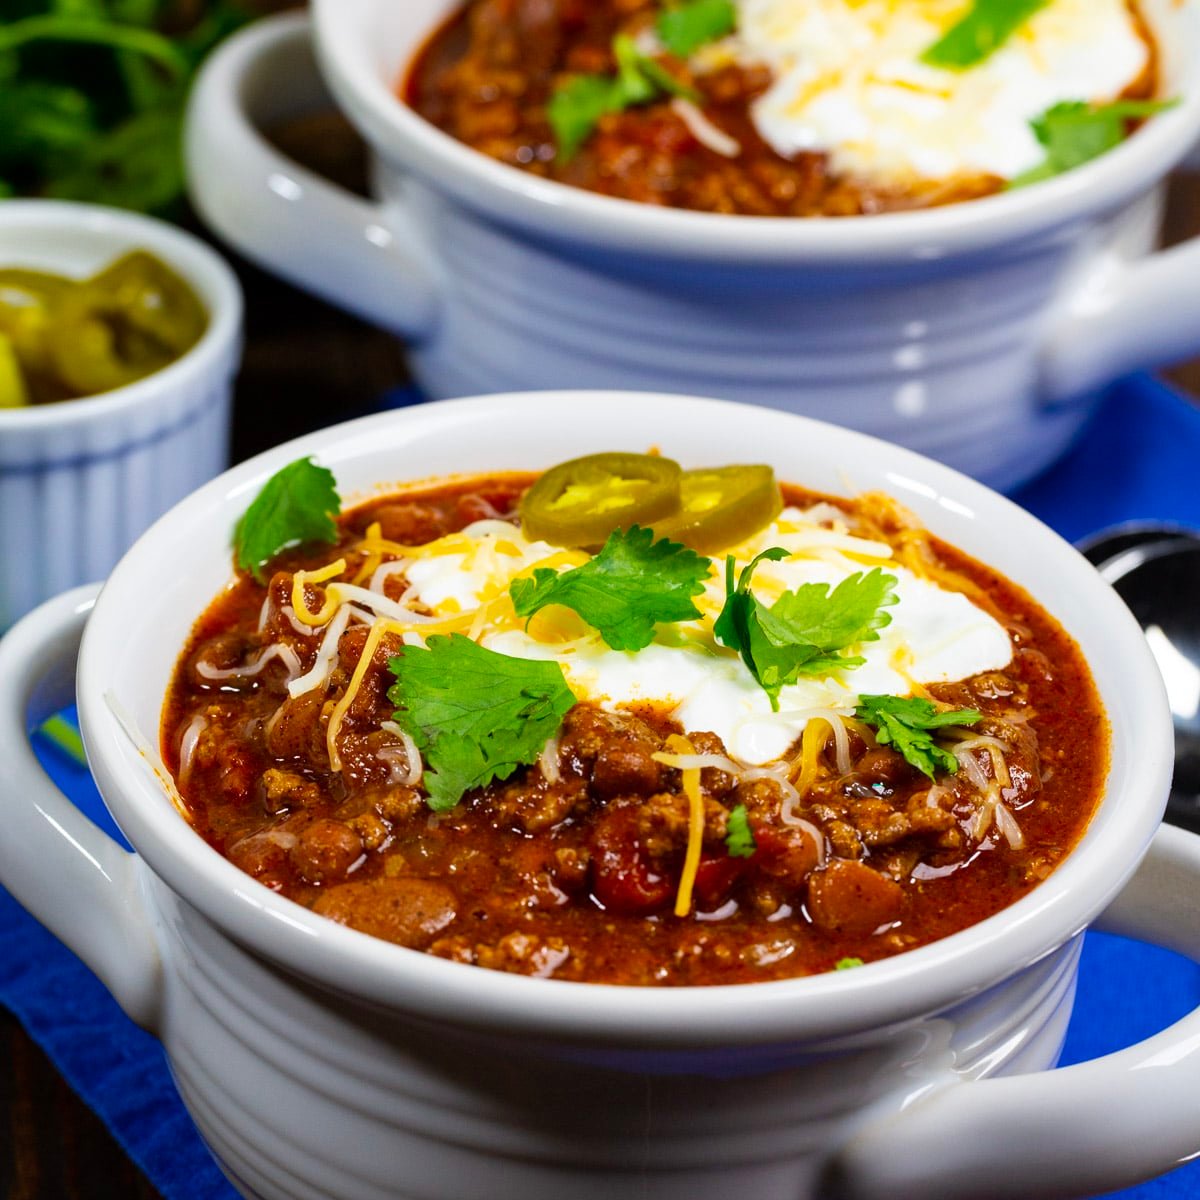 Rotel Chili topped with sour cream, cilantro and jalapenos.